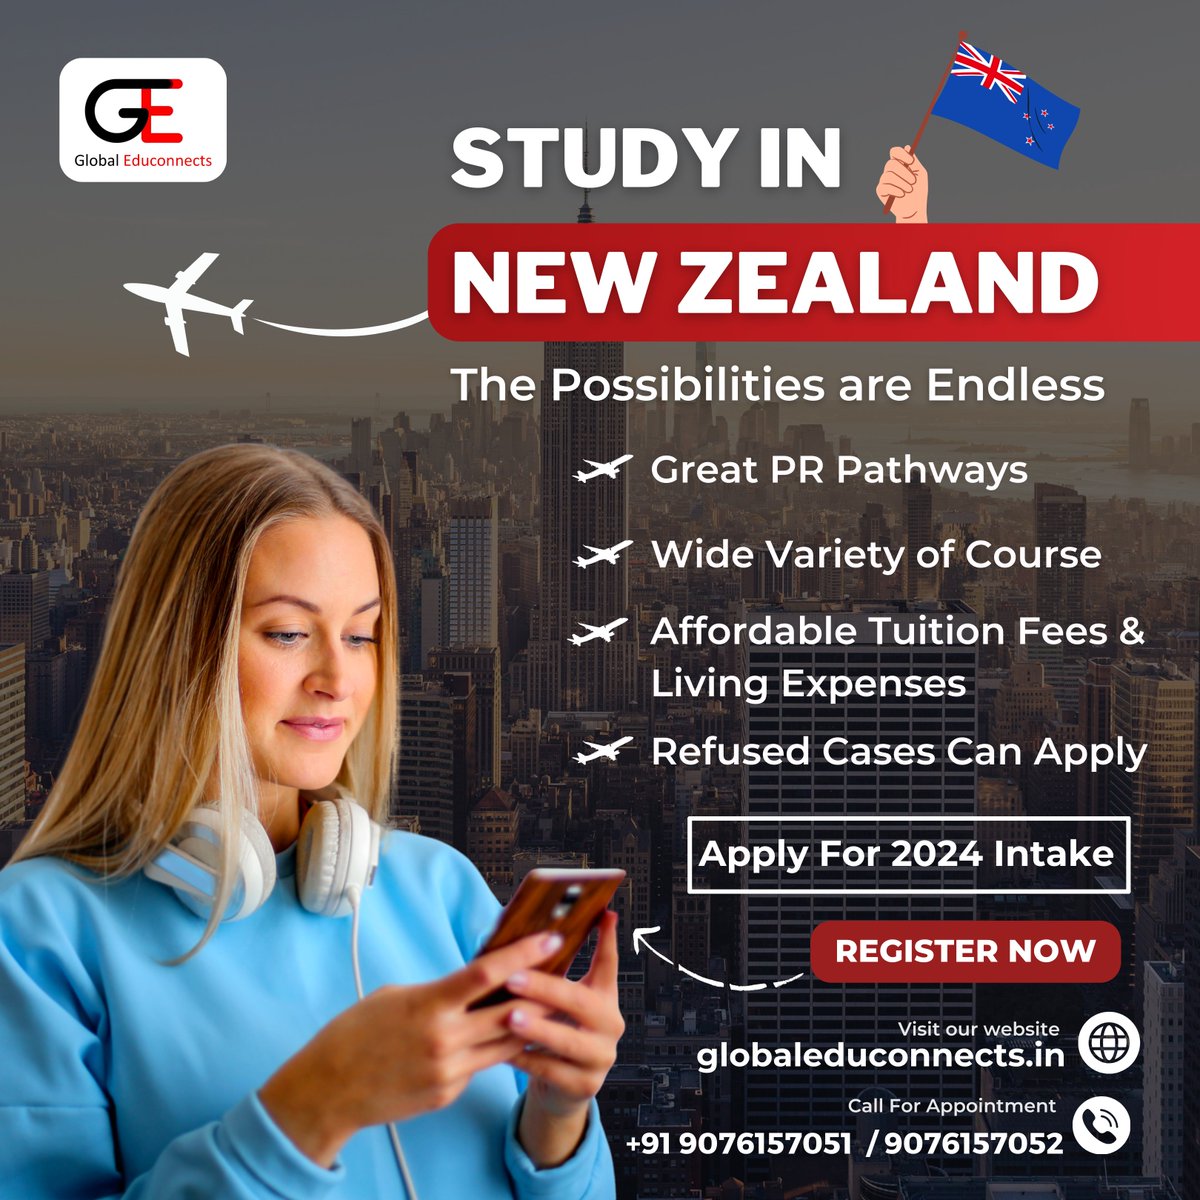 Exploring new horizons  Excited to embark on my academic journey in New Zealand

Call Now - +91 90761 57051 / 90761 57052

#StudyinNewZealand #studyinnewzealand #studyinnewzealand🇳🇿️ #studyinnewzeland
#studyin2024 #globaleduconnects #studyabroad